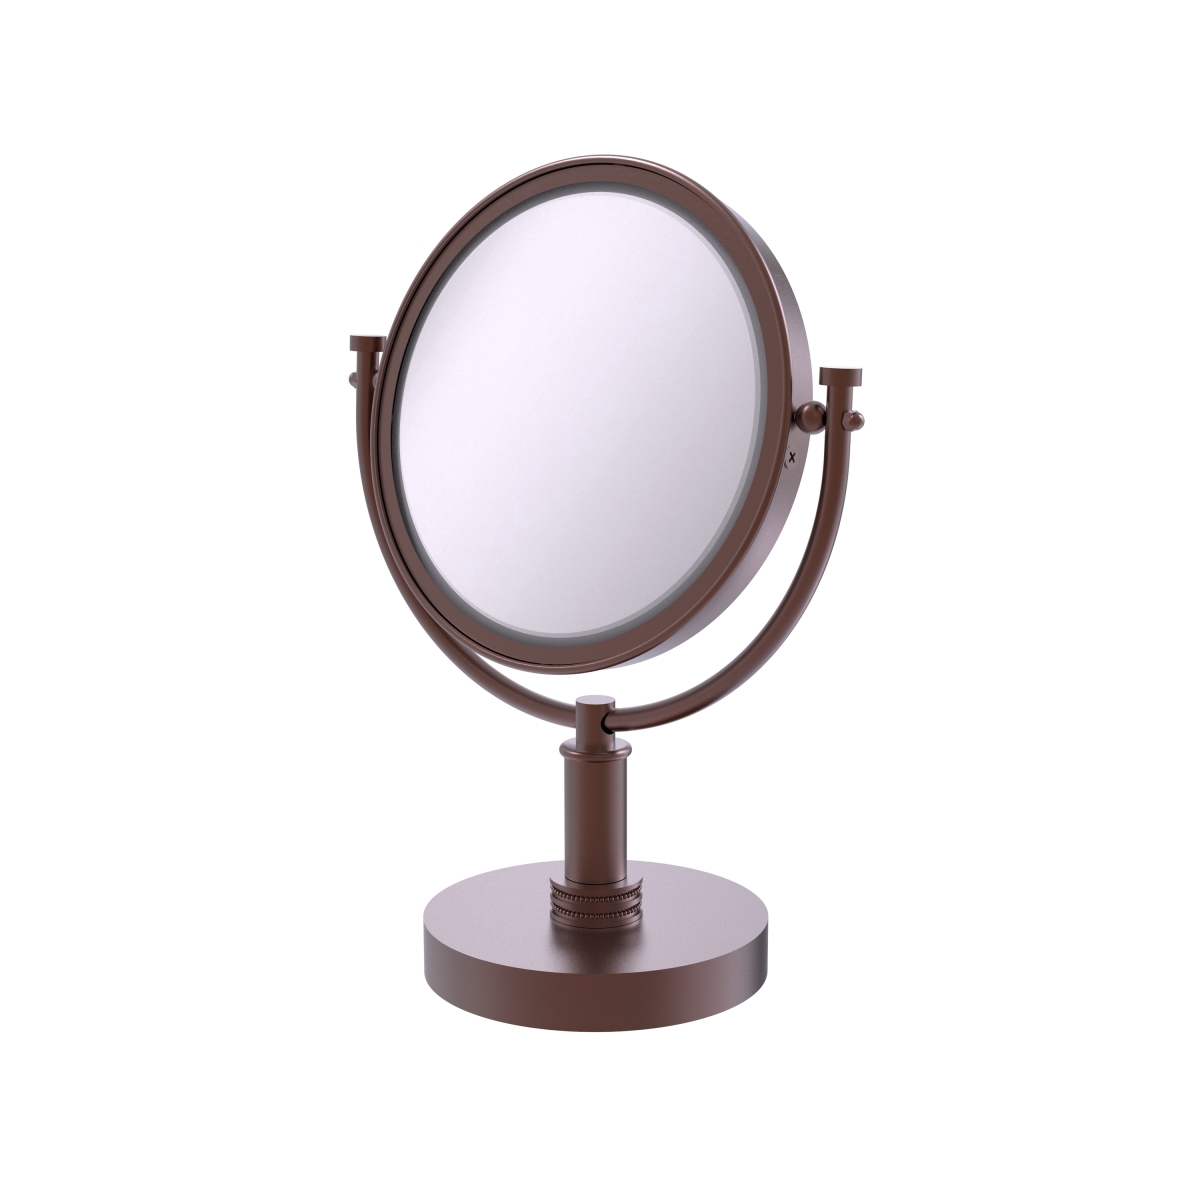 Picture of Allied Brass DM-4D-3X-CA 8 in. Vanity Top Make-Up Mirror 3X Magnification, Antique Copper - 15 x 8 x 8 in.